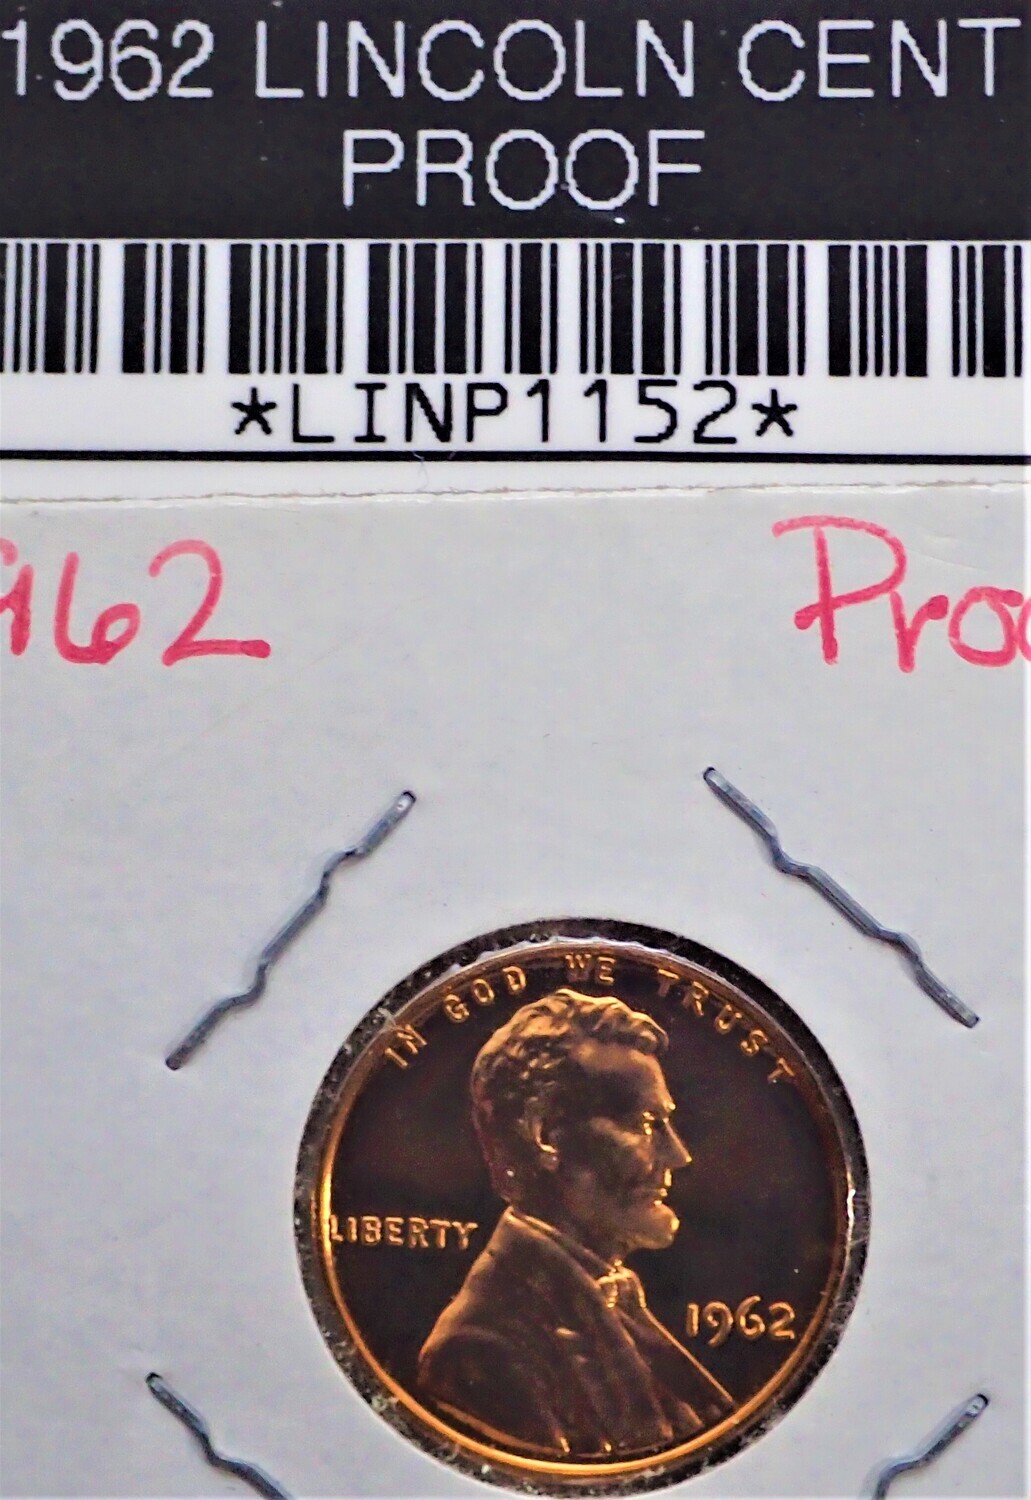 1962 LINCOLN CENT PROOF LINP1152